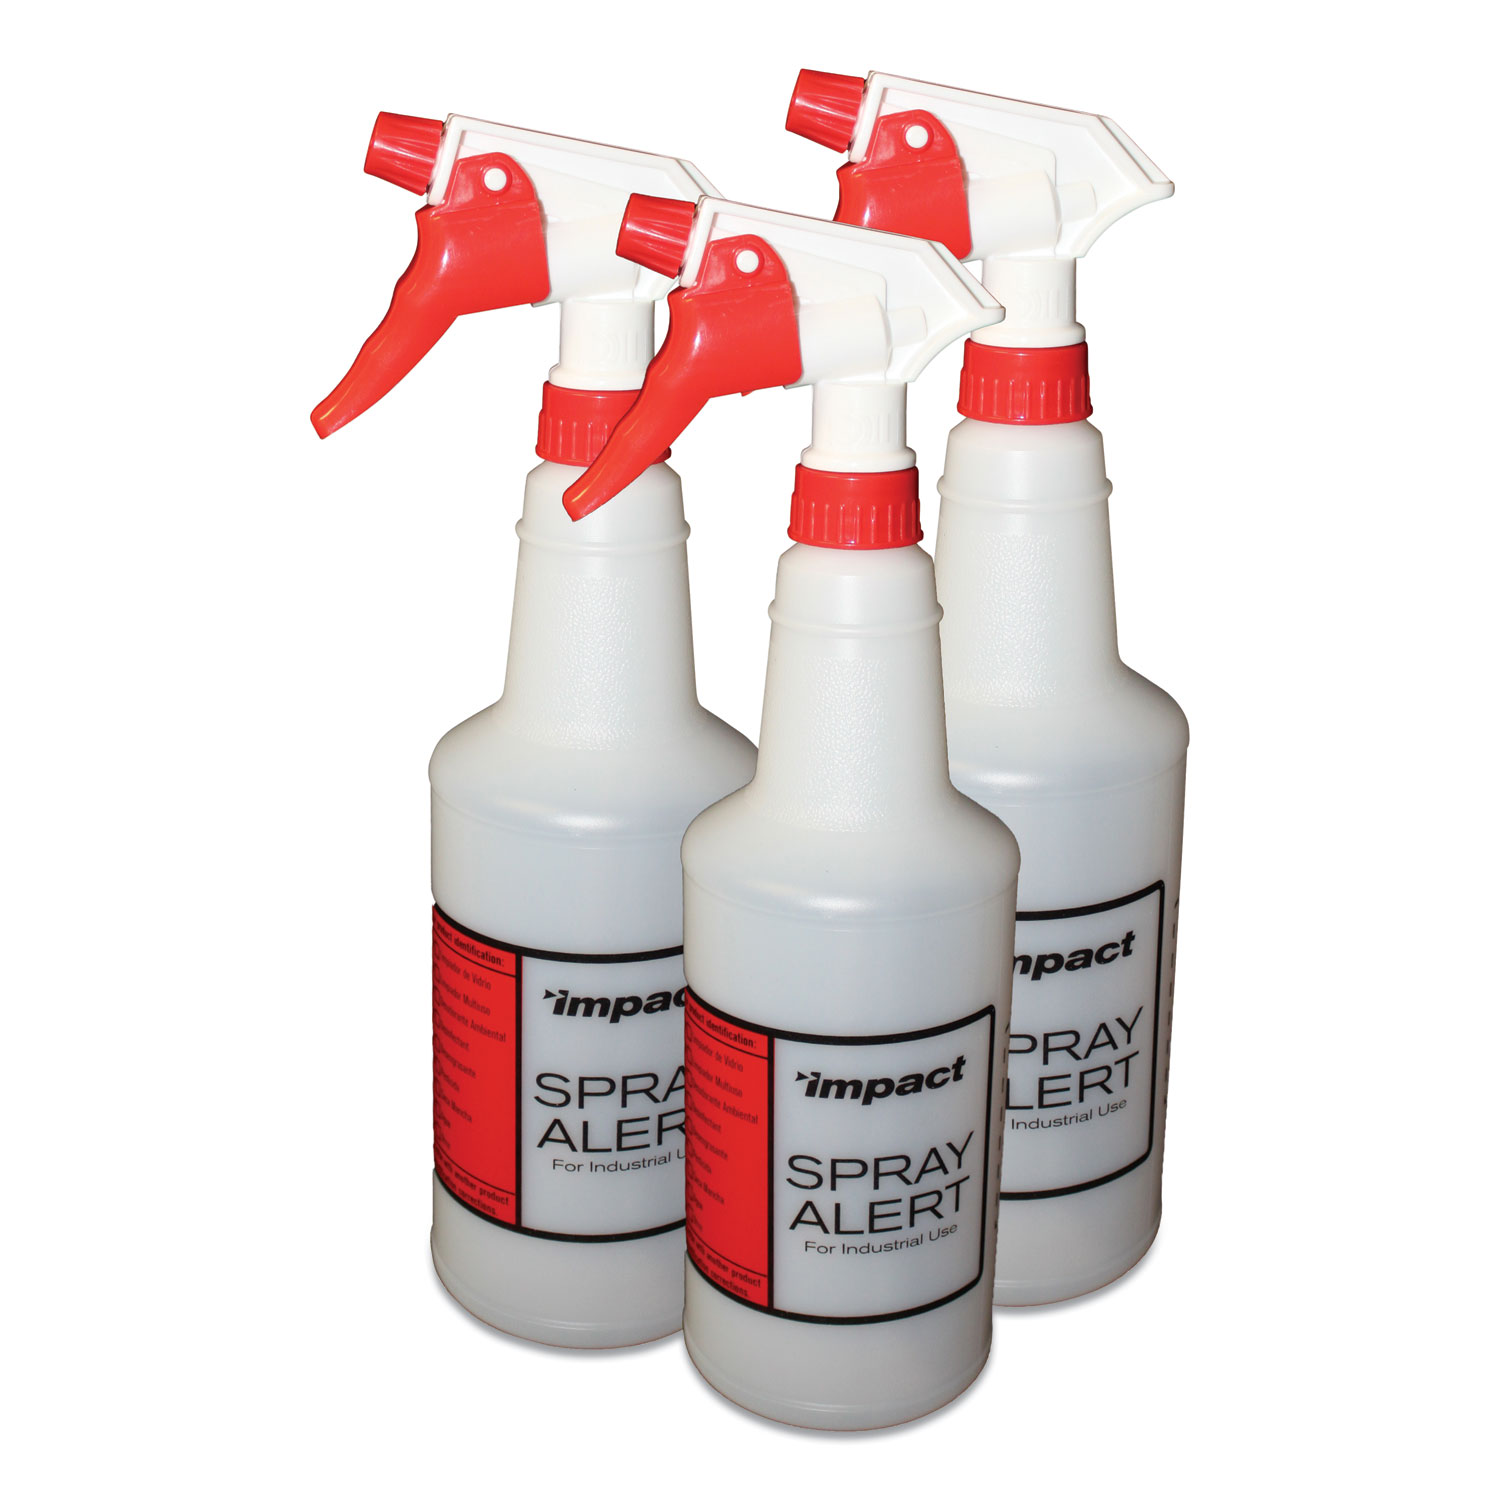 Impact® Spray Alert System, 24 oz, Natural with Red/White Sprayer, 3/Pack, 32 Packs/Carton